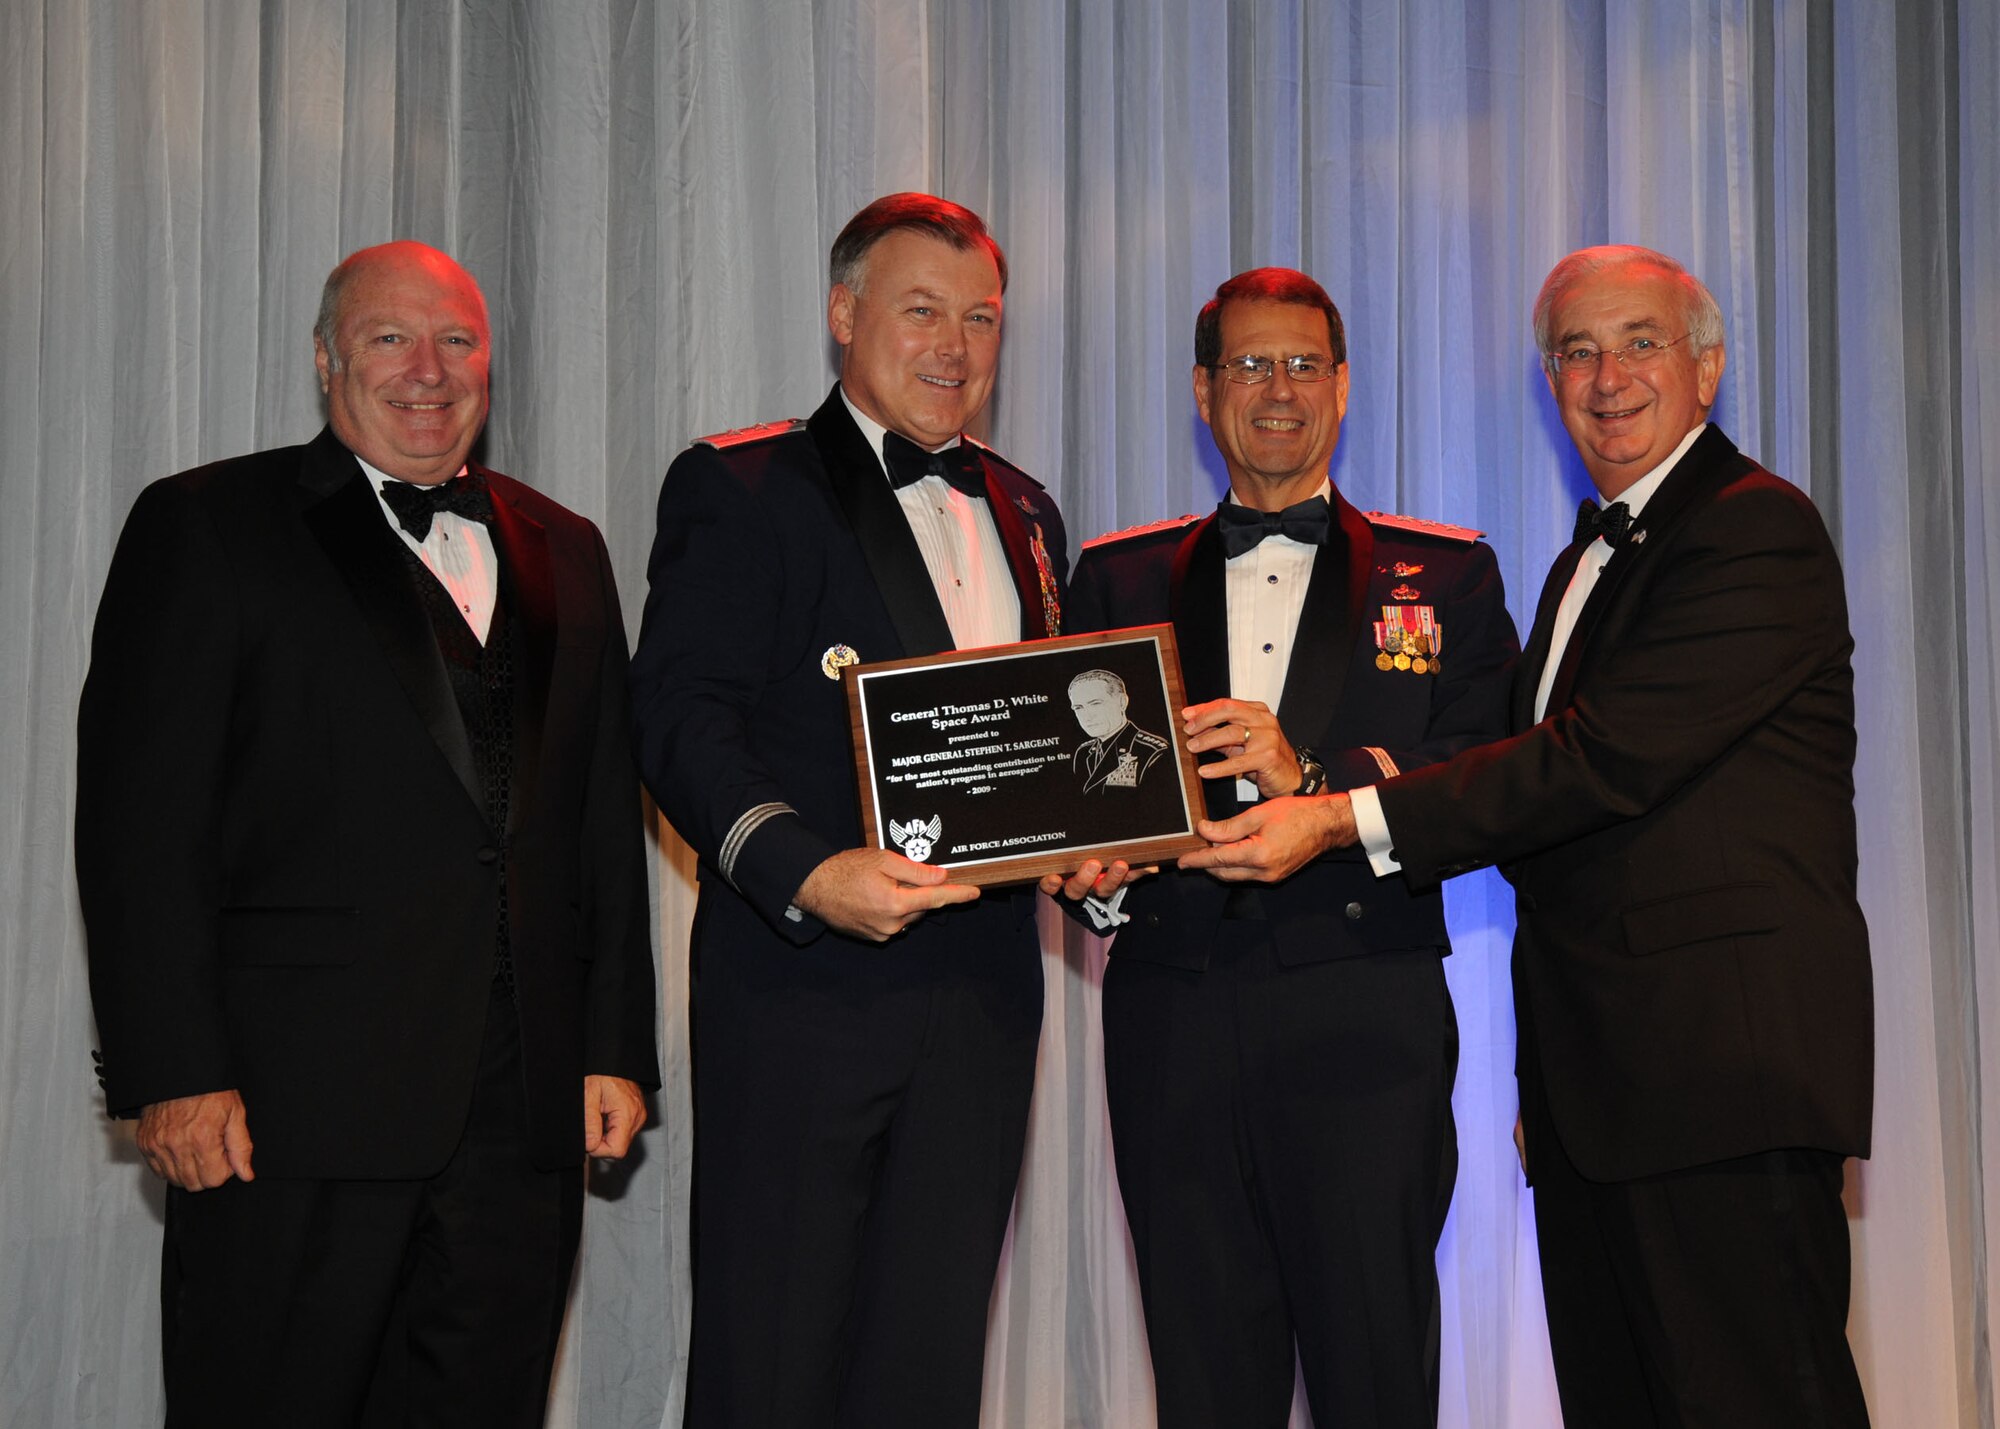 (Left to right) Retired Maj. Gen. Thomas Taverney, the Air Force Association's General Schriever Los Angeles Chapter President presents the 2009 General Thomas D. White U.S. Air Force Space Trophy to Maj. Gen. Stephen T. Sargeant, Air Force Operational Test and Evaluation Center Commander, with the assistance of Gen. John Sheridan, Space and Missile System Center Commander, and Mr. Joseph Sutter, Air Force Association Board Chairman. General Sargeant received the trophy at the annual Air Force Ball held Nov. 20 in Beverly Hills, Calif. (Photo courtesy of the Air Force Association).